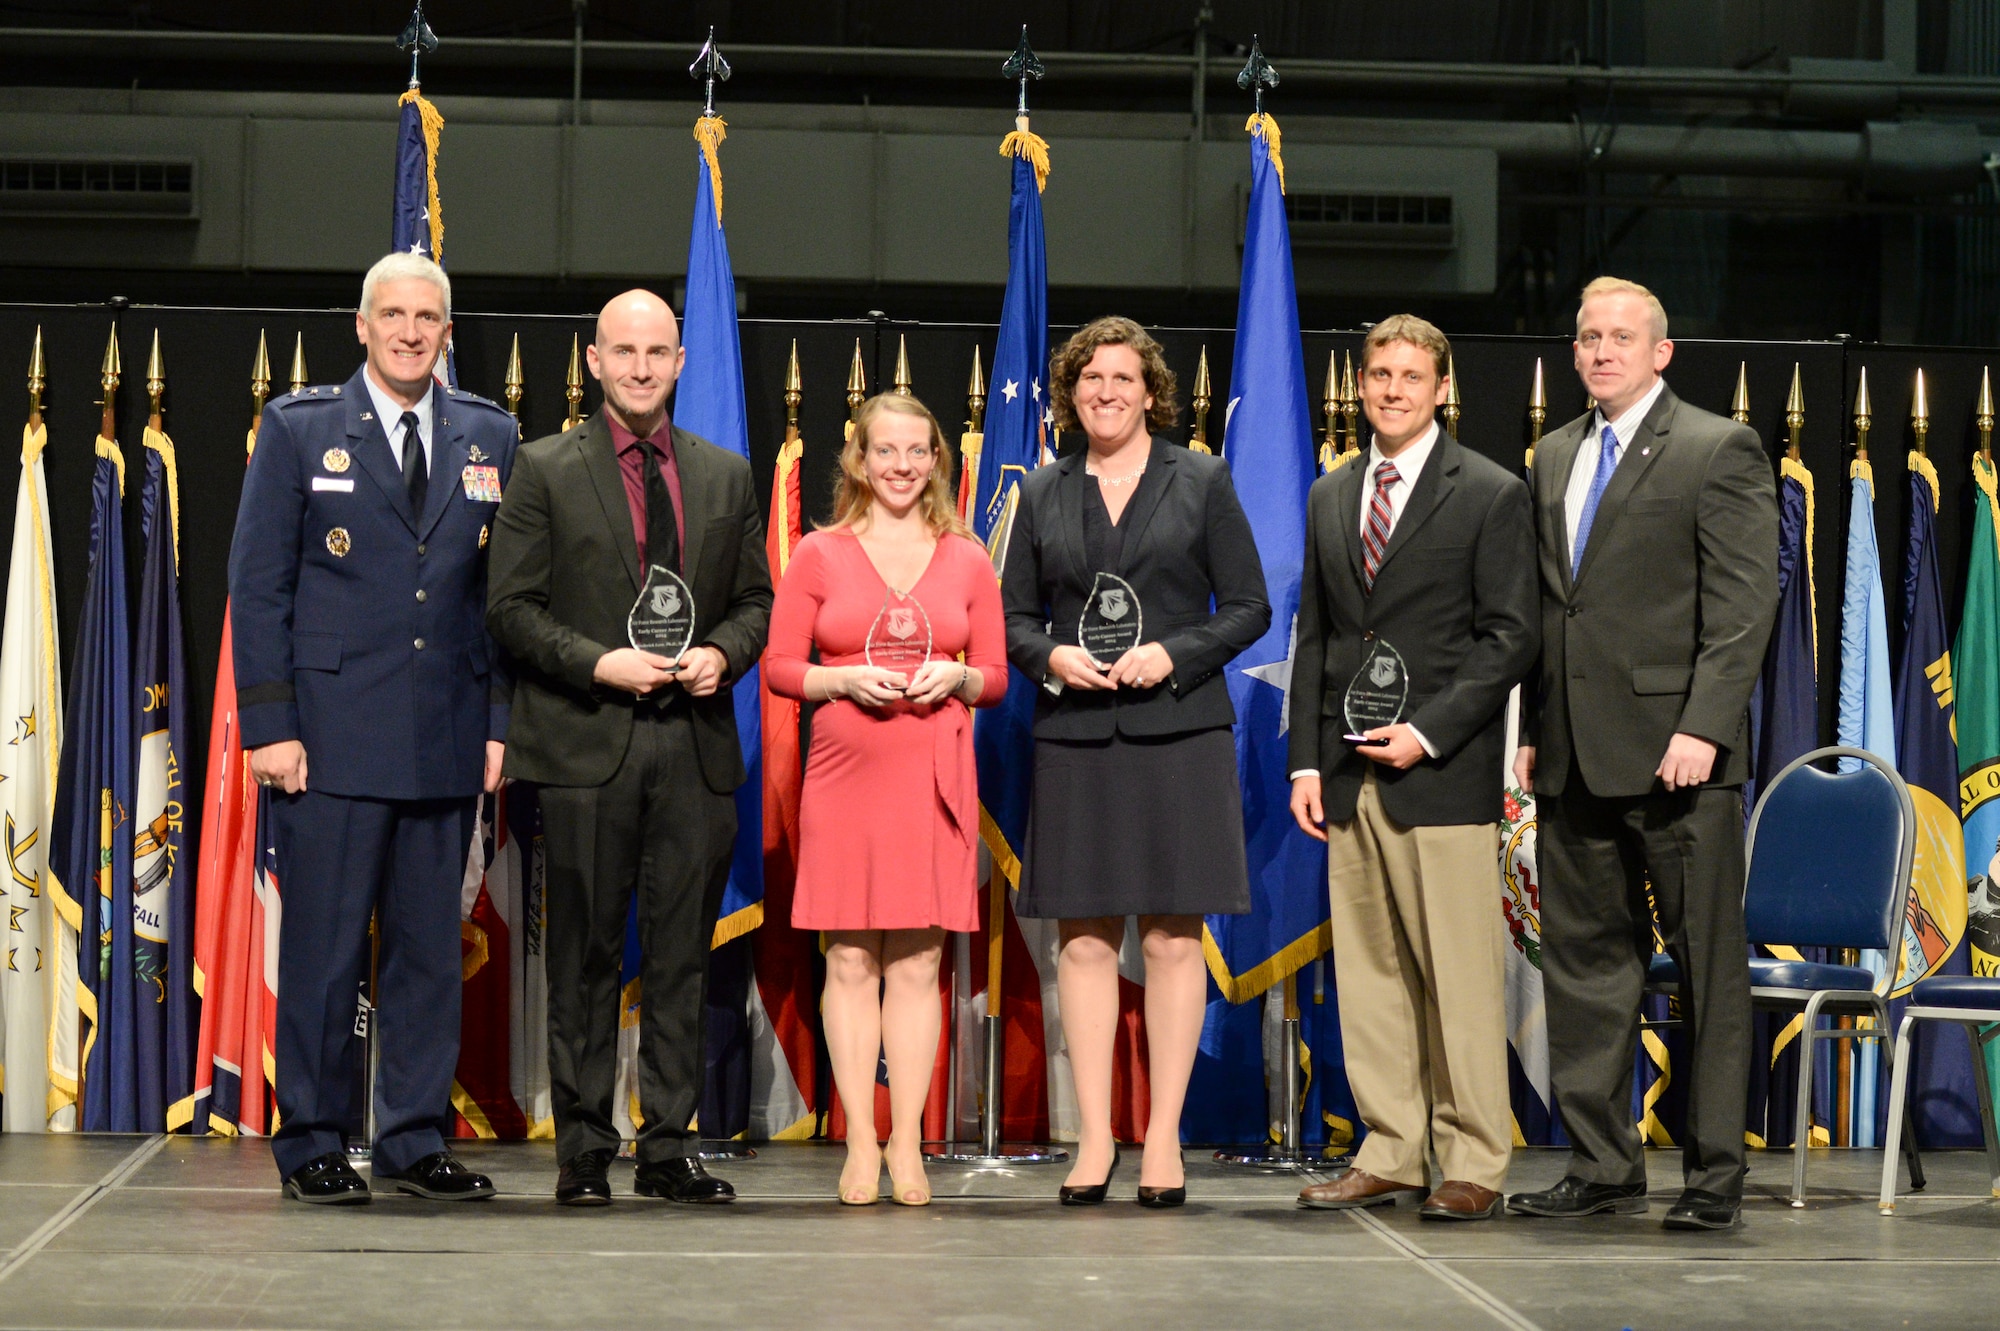 Maj. Gen. Tom Masiello and Dr. Morley Stone (far right) presented four Air Force Research Laboratory Early Career Awards Oct. 30, 2014 at the National Museum of the U.S. Air Force. The award recognizes AFRL's most outstanding young scientists and engineers for scientific or engineering work early in their careers. From left: Dr. Frederick Leve, Research Aerospace Engineer, Space Vehicles Directorate; Dr. Tiffany Jastrzembski, cognitive research scientist, 711th Human Performance Wing; Dr. Janet Wolfson, senior mechanical engineer, Munitions Directorate; and Dr. Derek Kingston, Unmanned Aerial Vehicle team lead, Control Science Center of Excellence, Aerospace Systems Directorate.
Maj. Gen. Masiello is AFRL commander, and Dr. Stone, AFRL chief technology officer. (U.S. Air Force photo/Wesley Farnsworth)